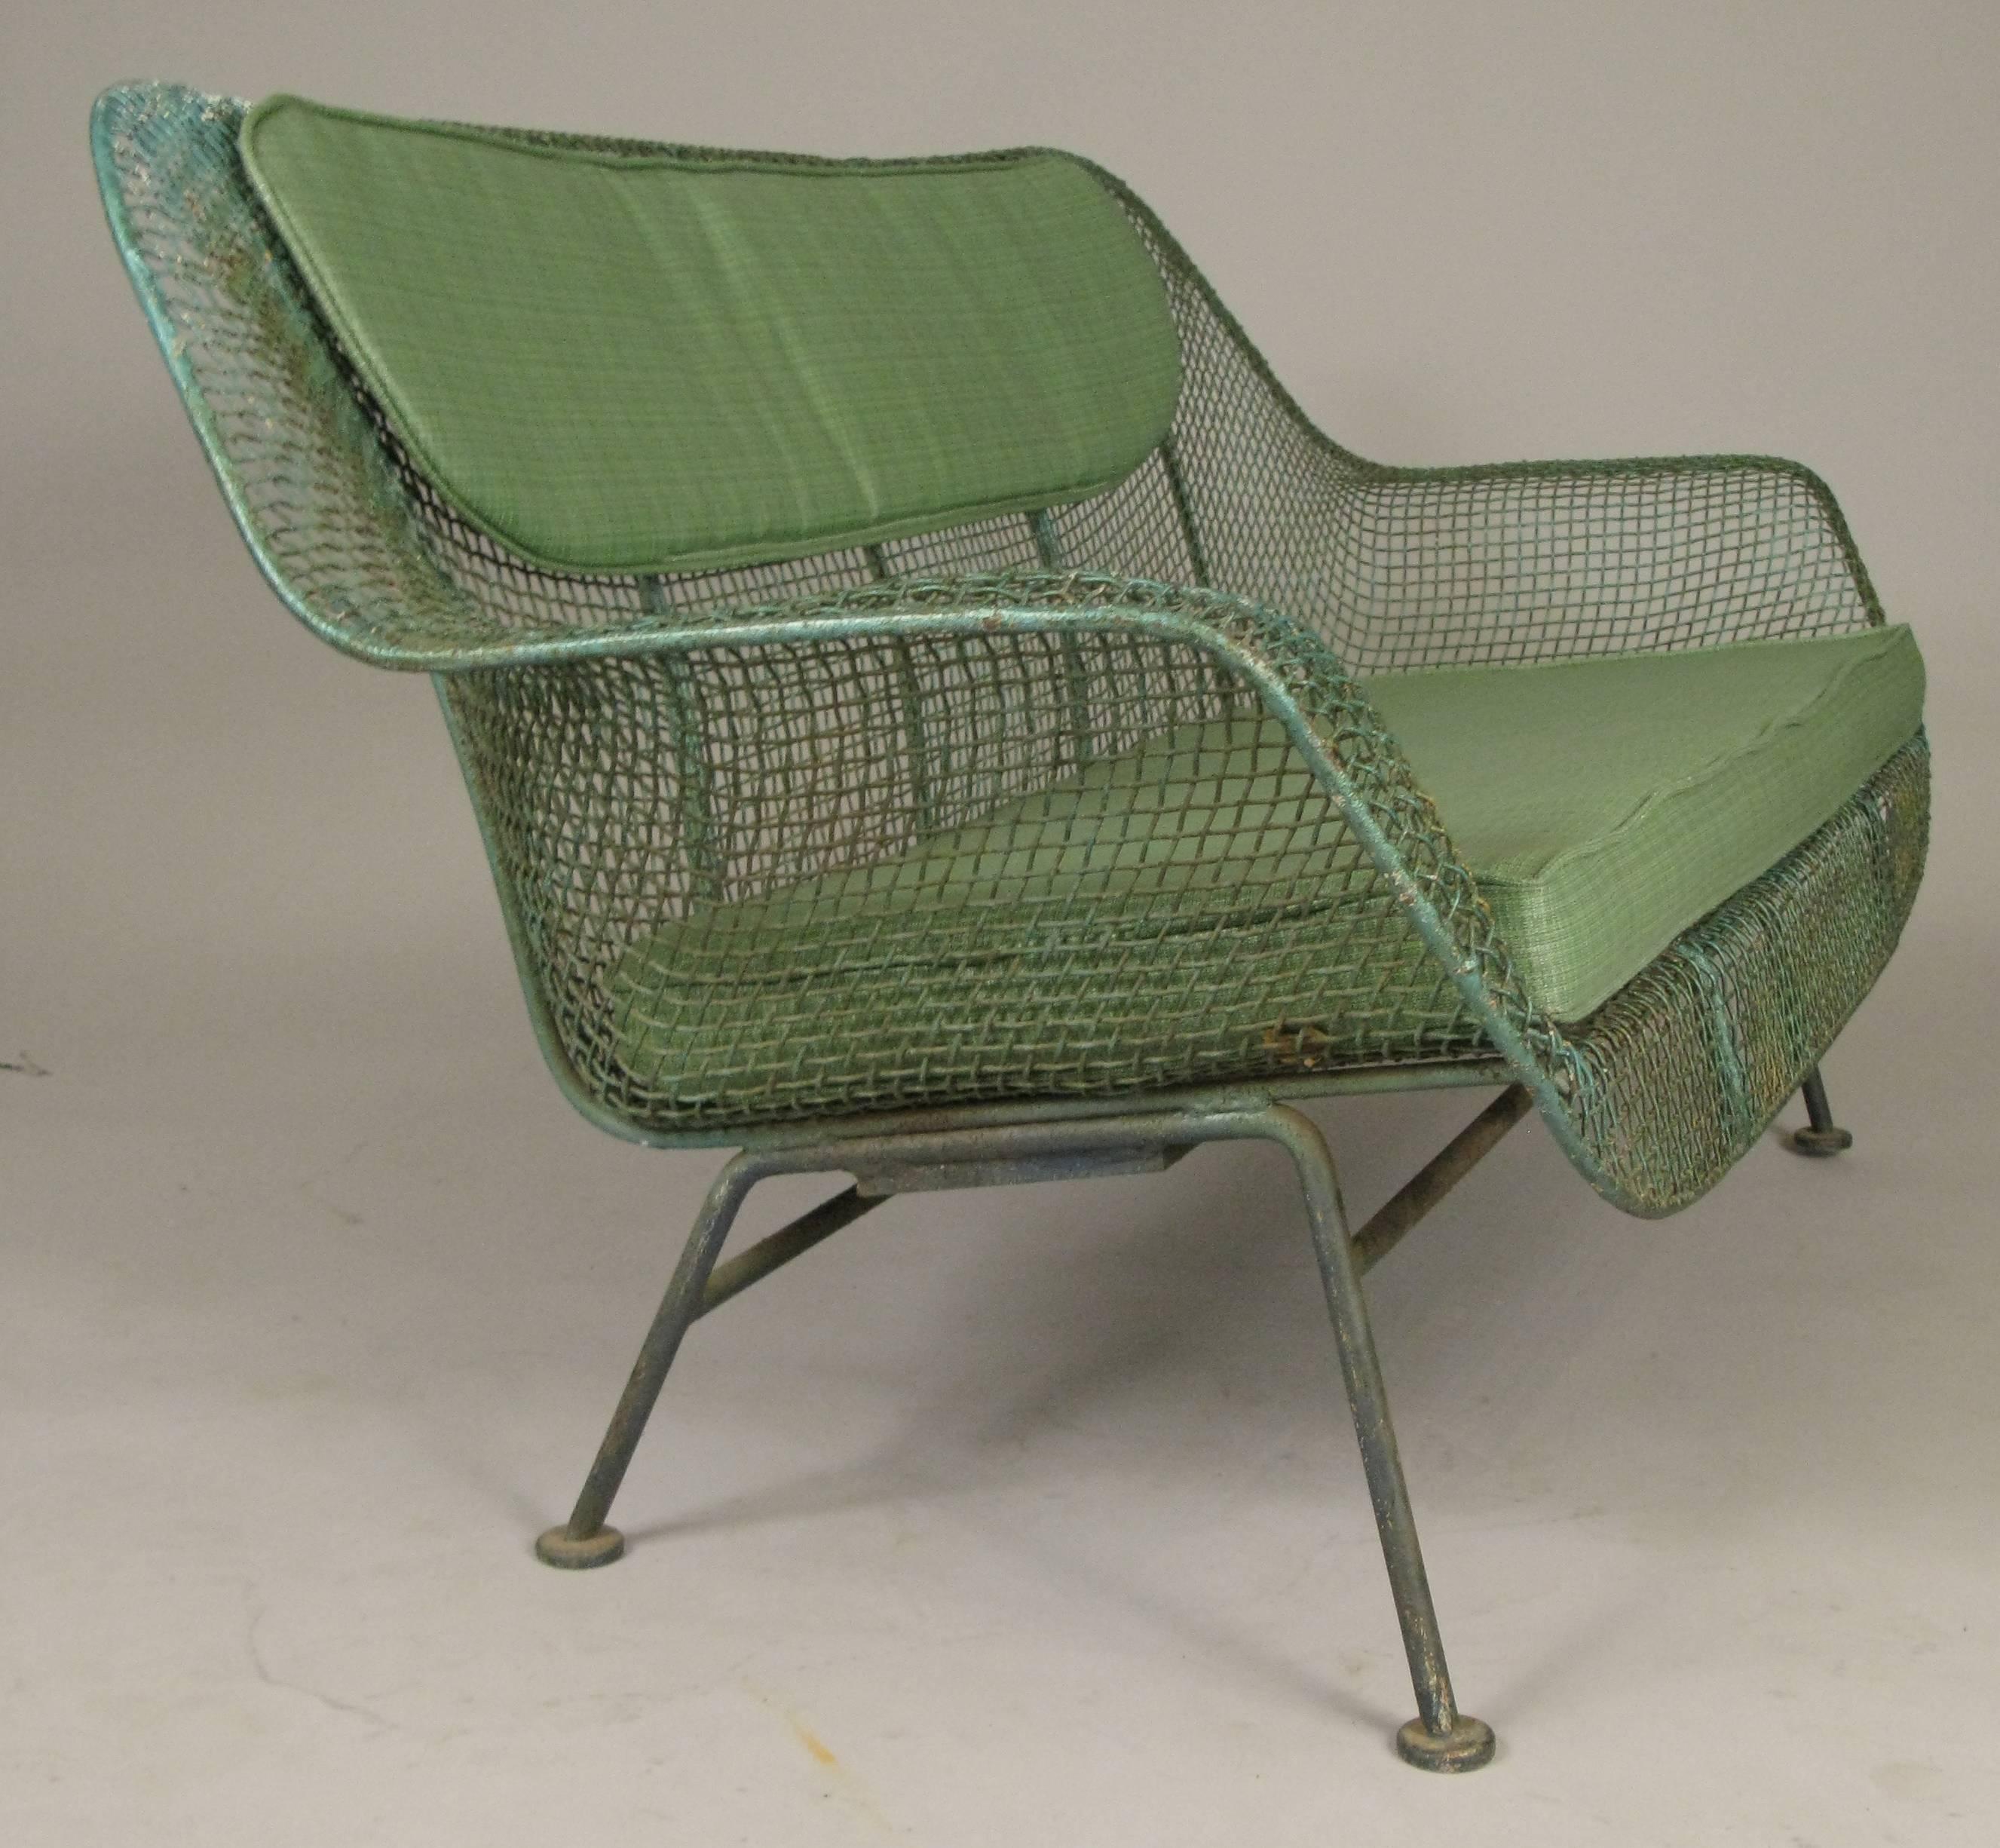 A vintage 1950s wrought iron and steel mesh settee from Russell Woodard's Classic and iconic sculptura series. Beautiful and Classic sculptural design, in its original forest green weathered painted finish, with a set of rare original cushions also